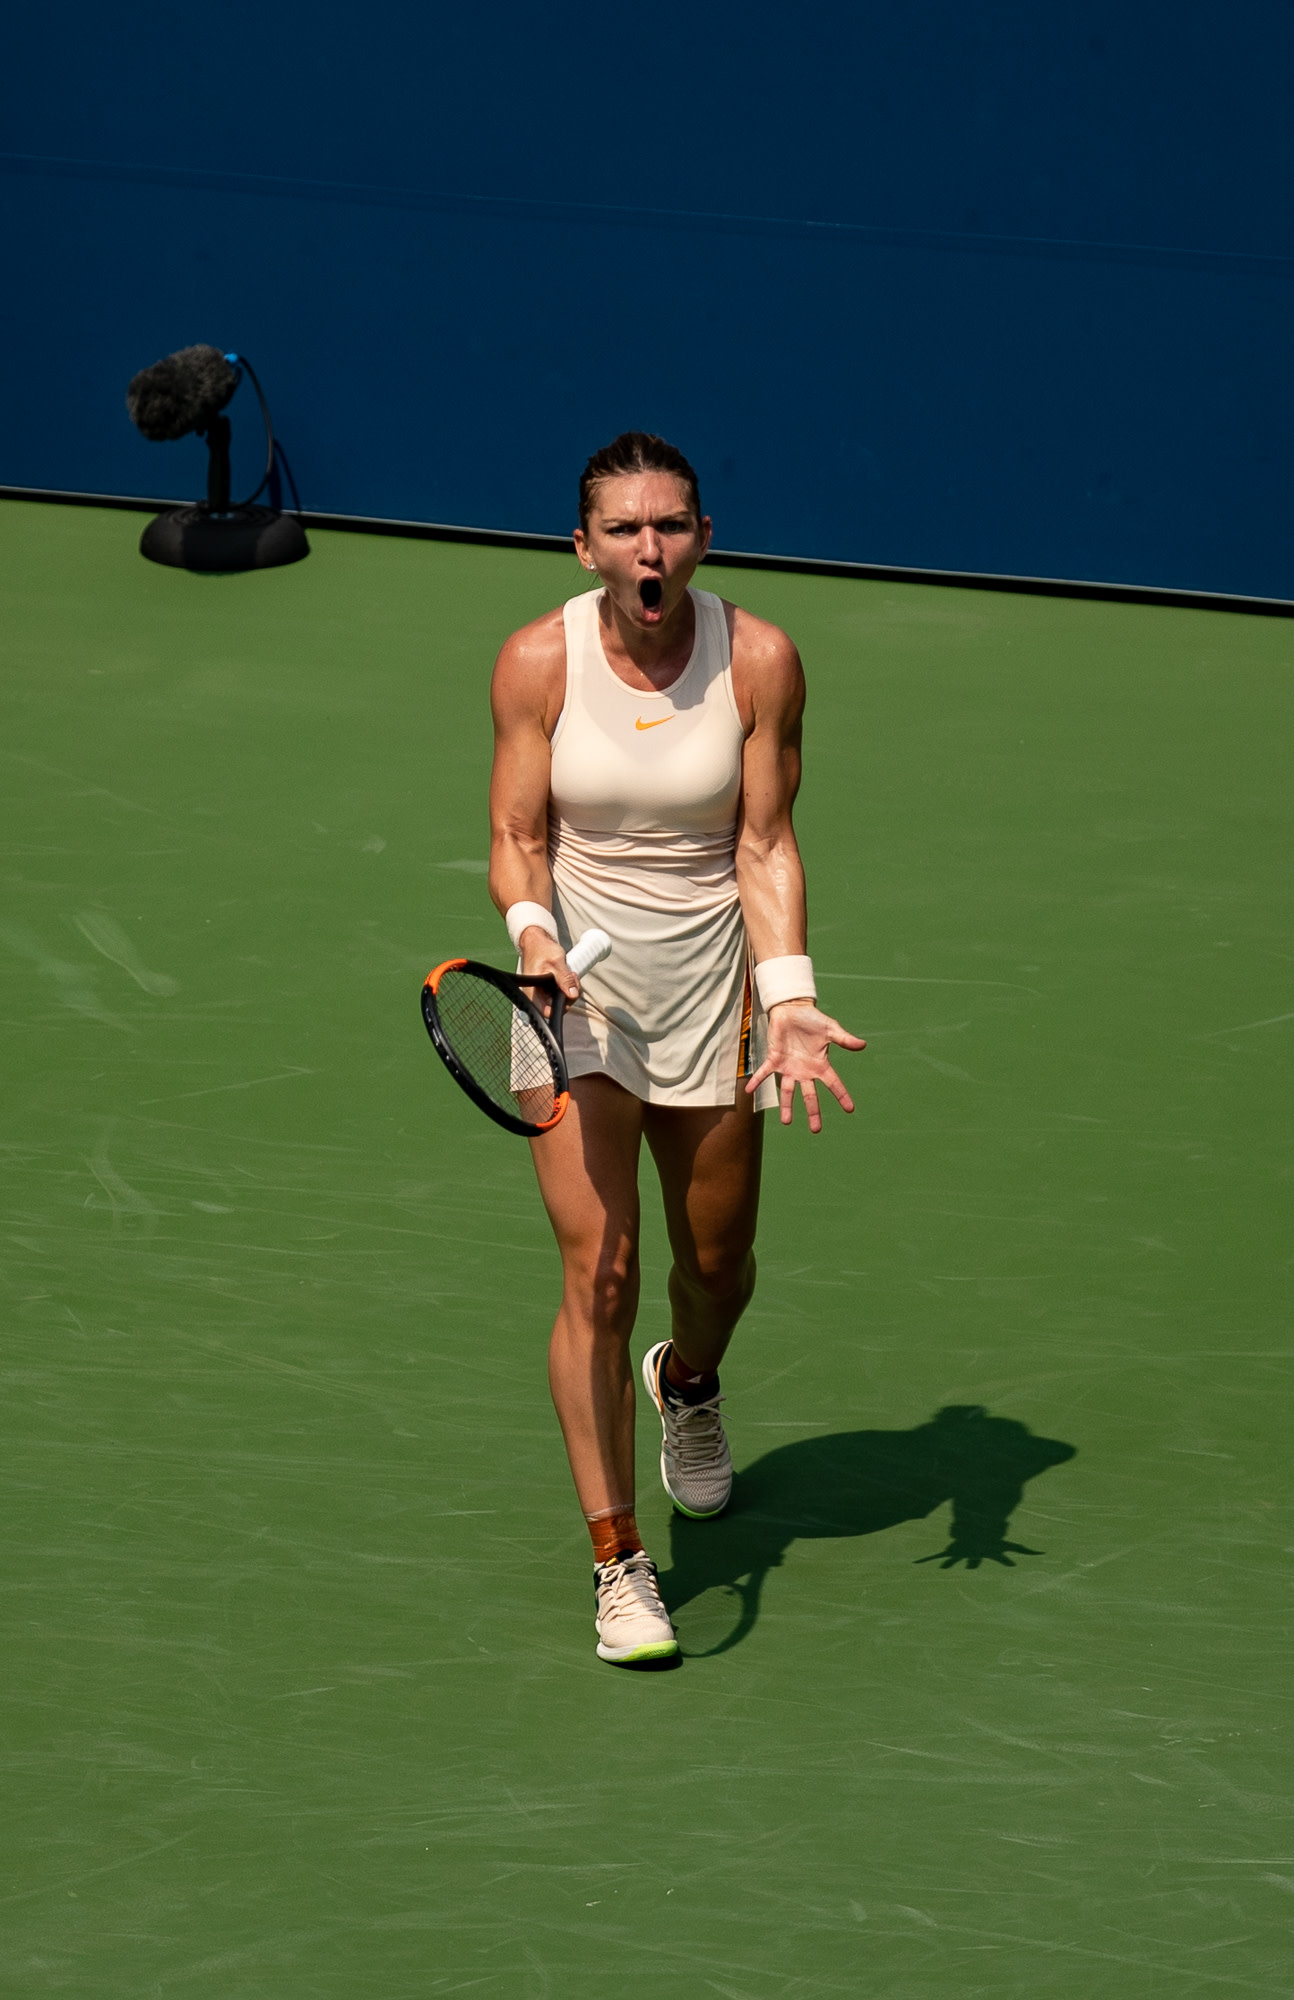 Kaia Kanepi reminds Halep that no player can outrun a well-struck ball